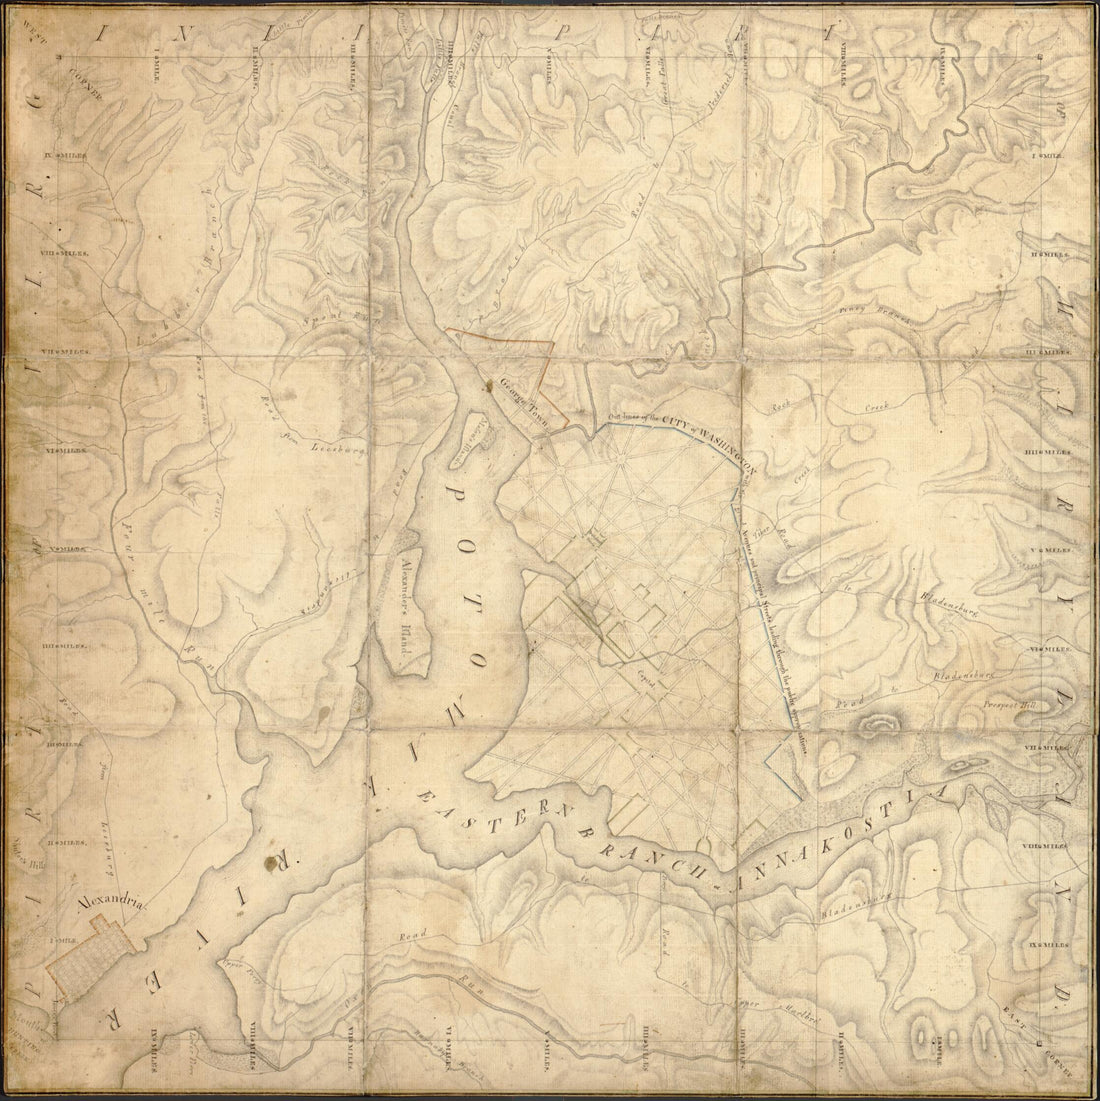 This old map of Territory of Columbia from 1793 was created by Andrew Ellicott in 1793